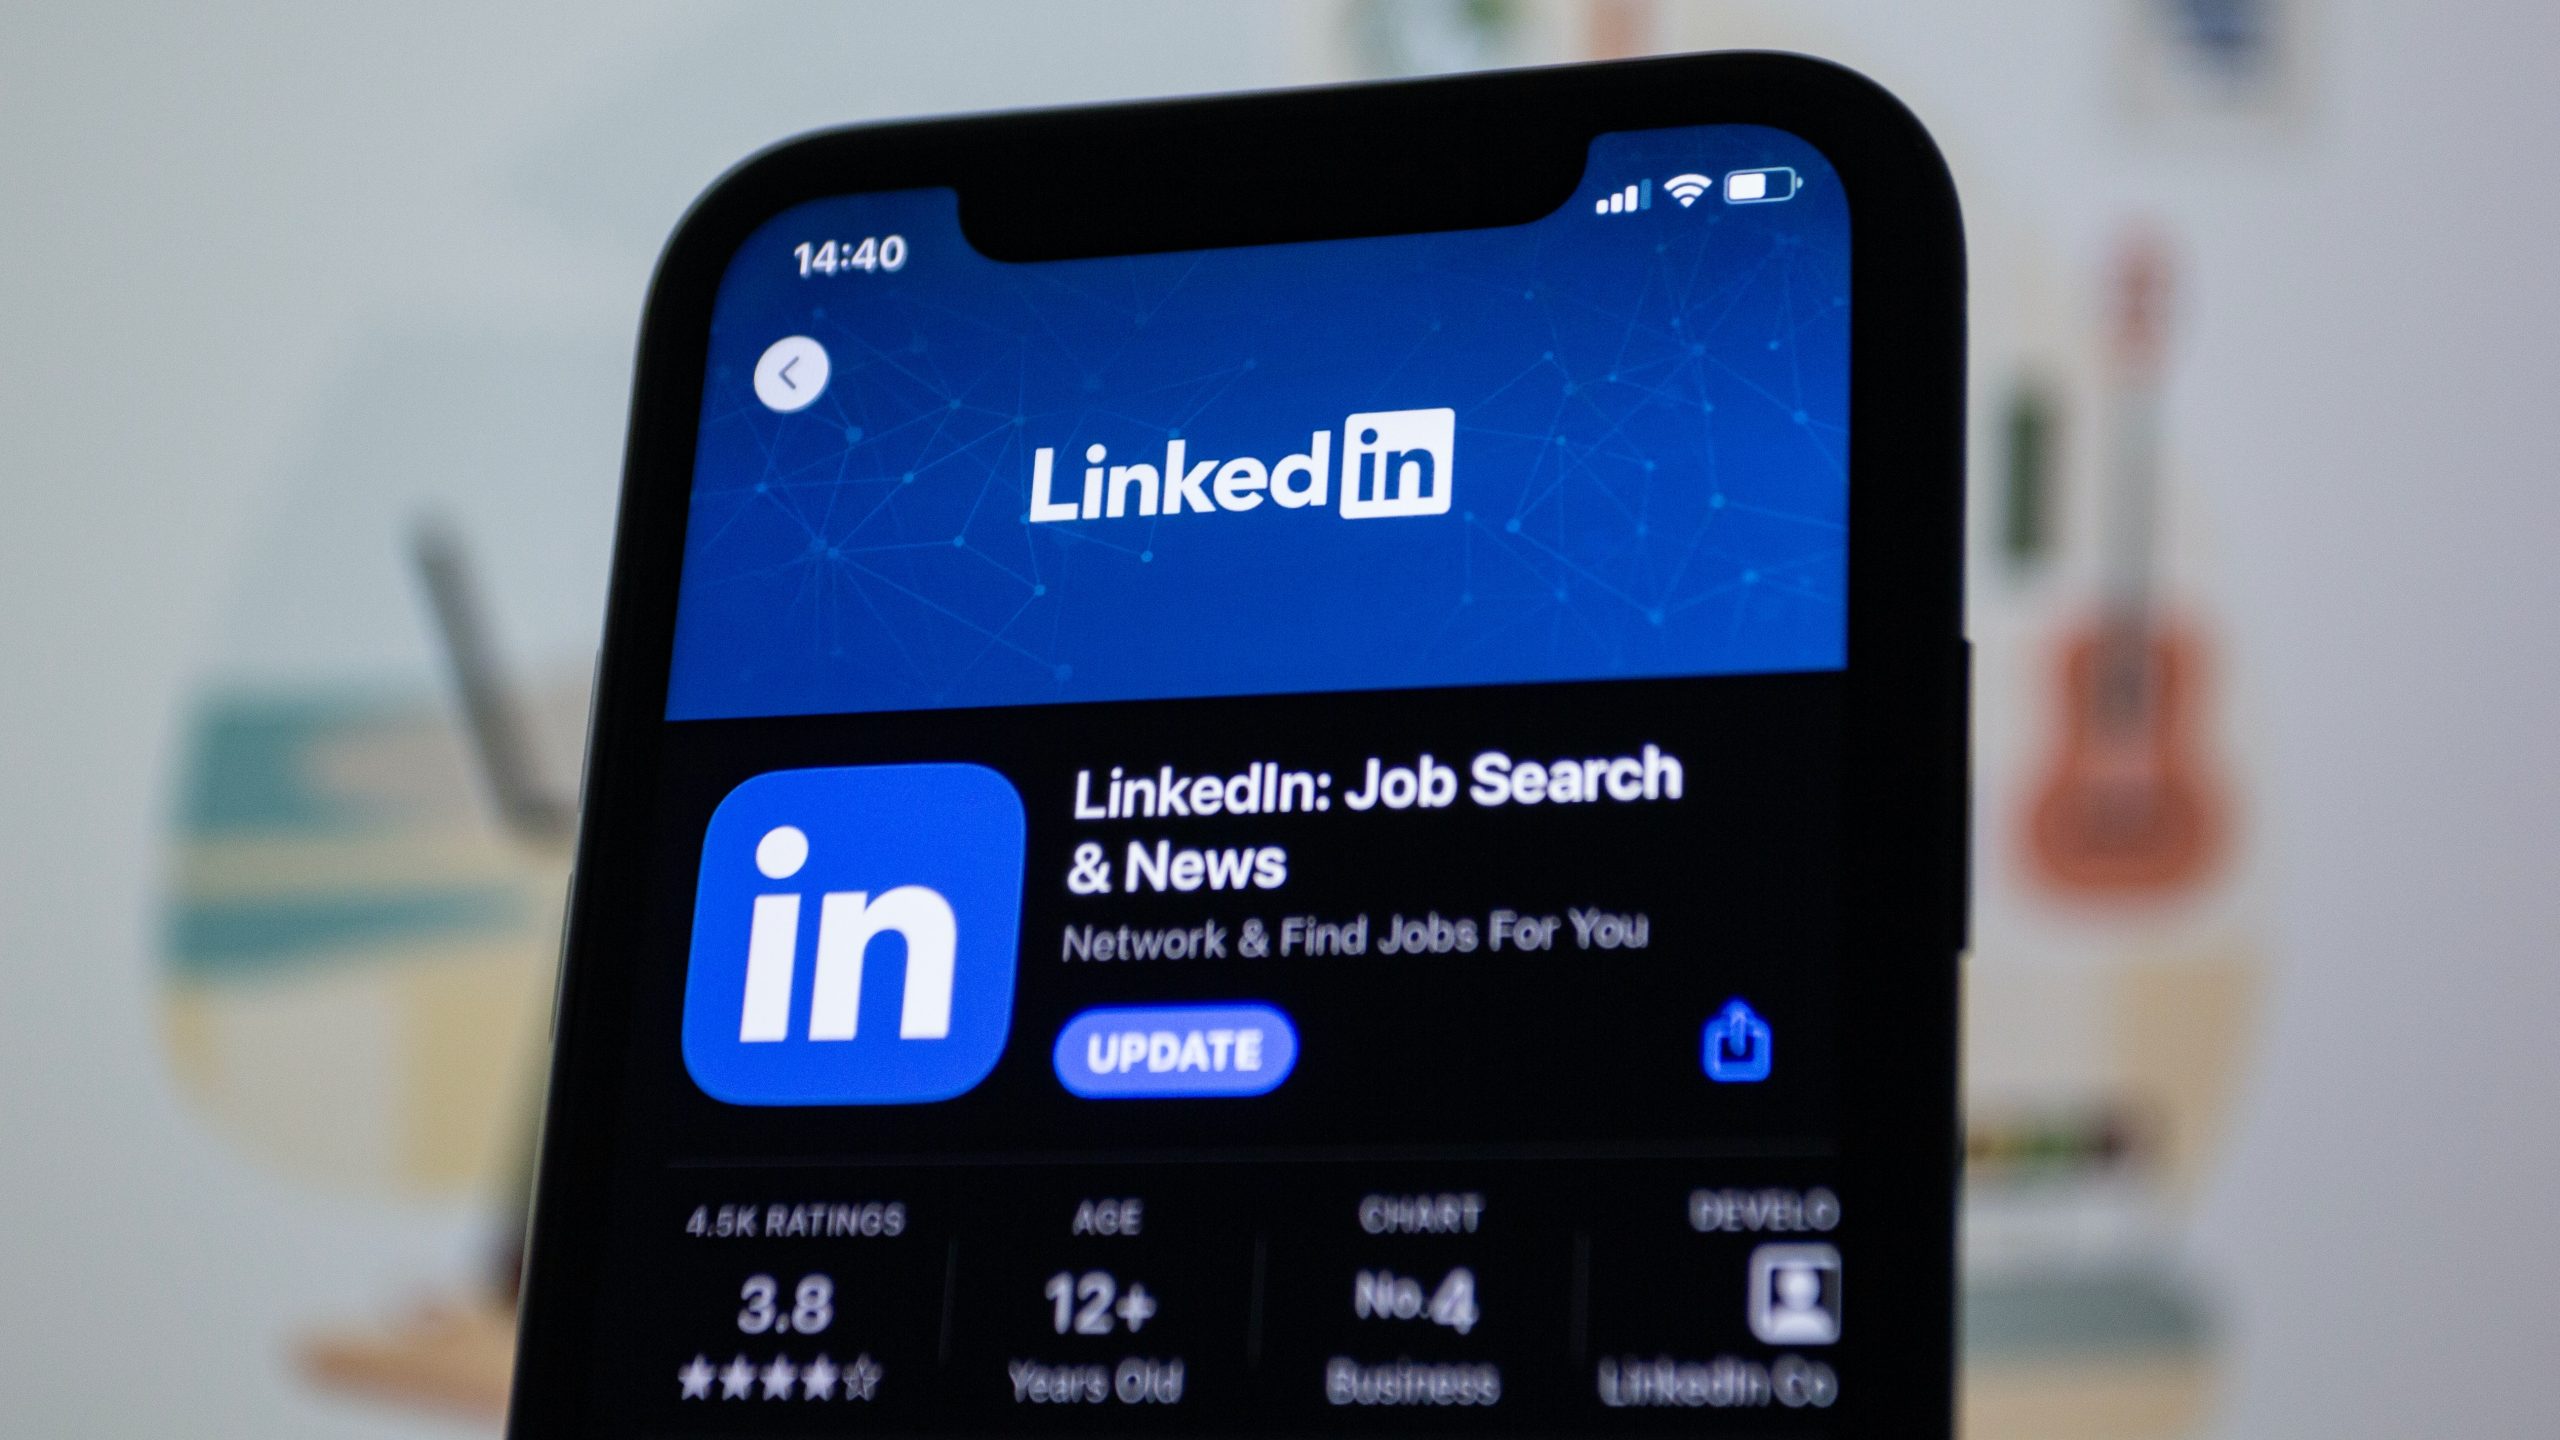 Search LinkedIn for Posts and People Profiles Without Logging In